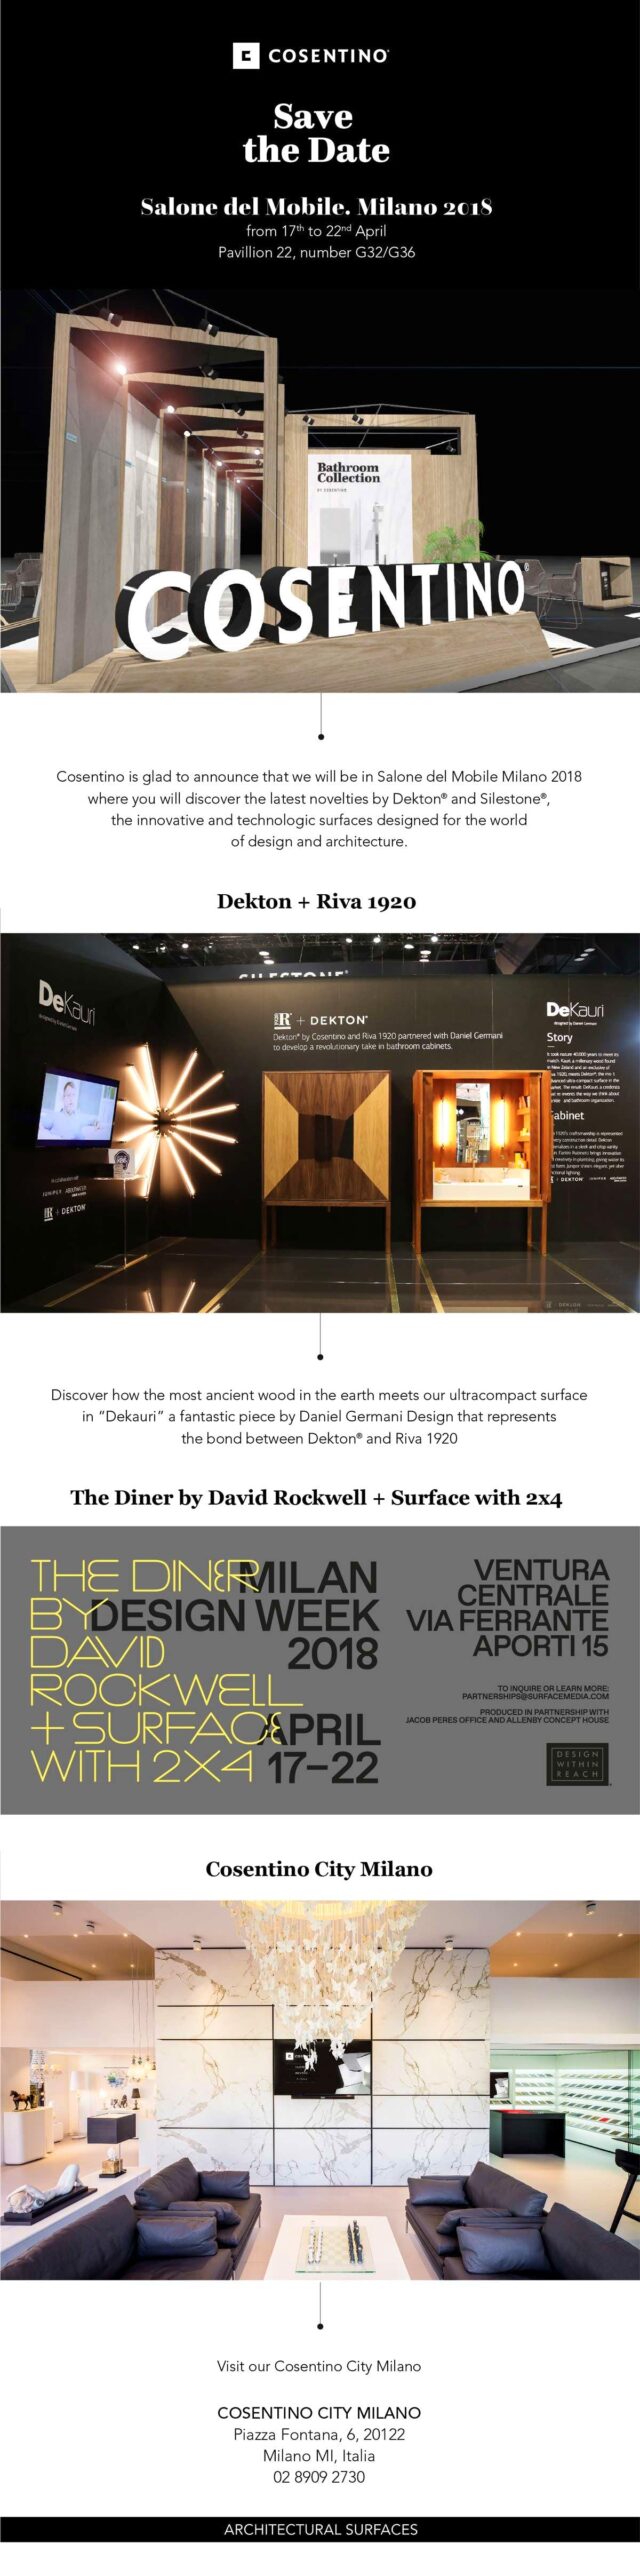 Image of Cosentino Save the Date Milan Design Week 18 2 1 6 scaled in Dekton® "leads" FiturtechY at FITUR 2017 - Cosentino